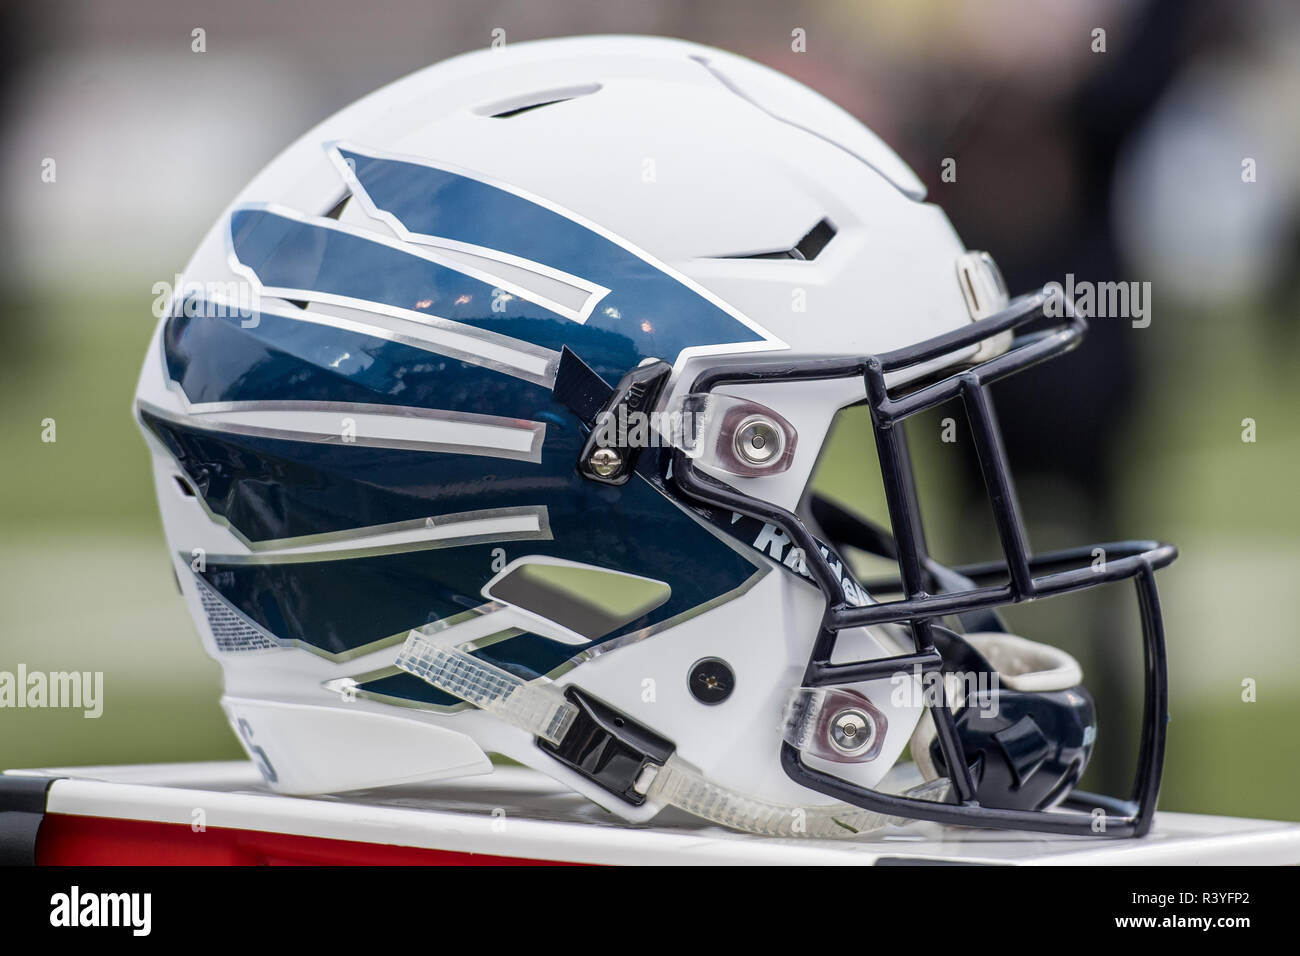 Houston, TX, USA. 24th Nov, 2018. A white Rice Owls helmet with a blue owl wing logo sits on the sideline during the 3rd quarter of an NCAA football game between the Old Dominion Monarchs and the Rice Owls at Rice Stadium in Houston, TX. Rice won the game 27 to 13.Trask Smith/CSM/Alamy Live News Stock Photo